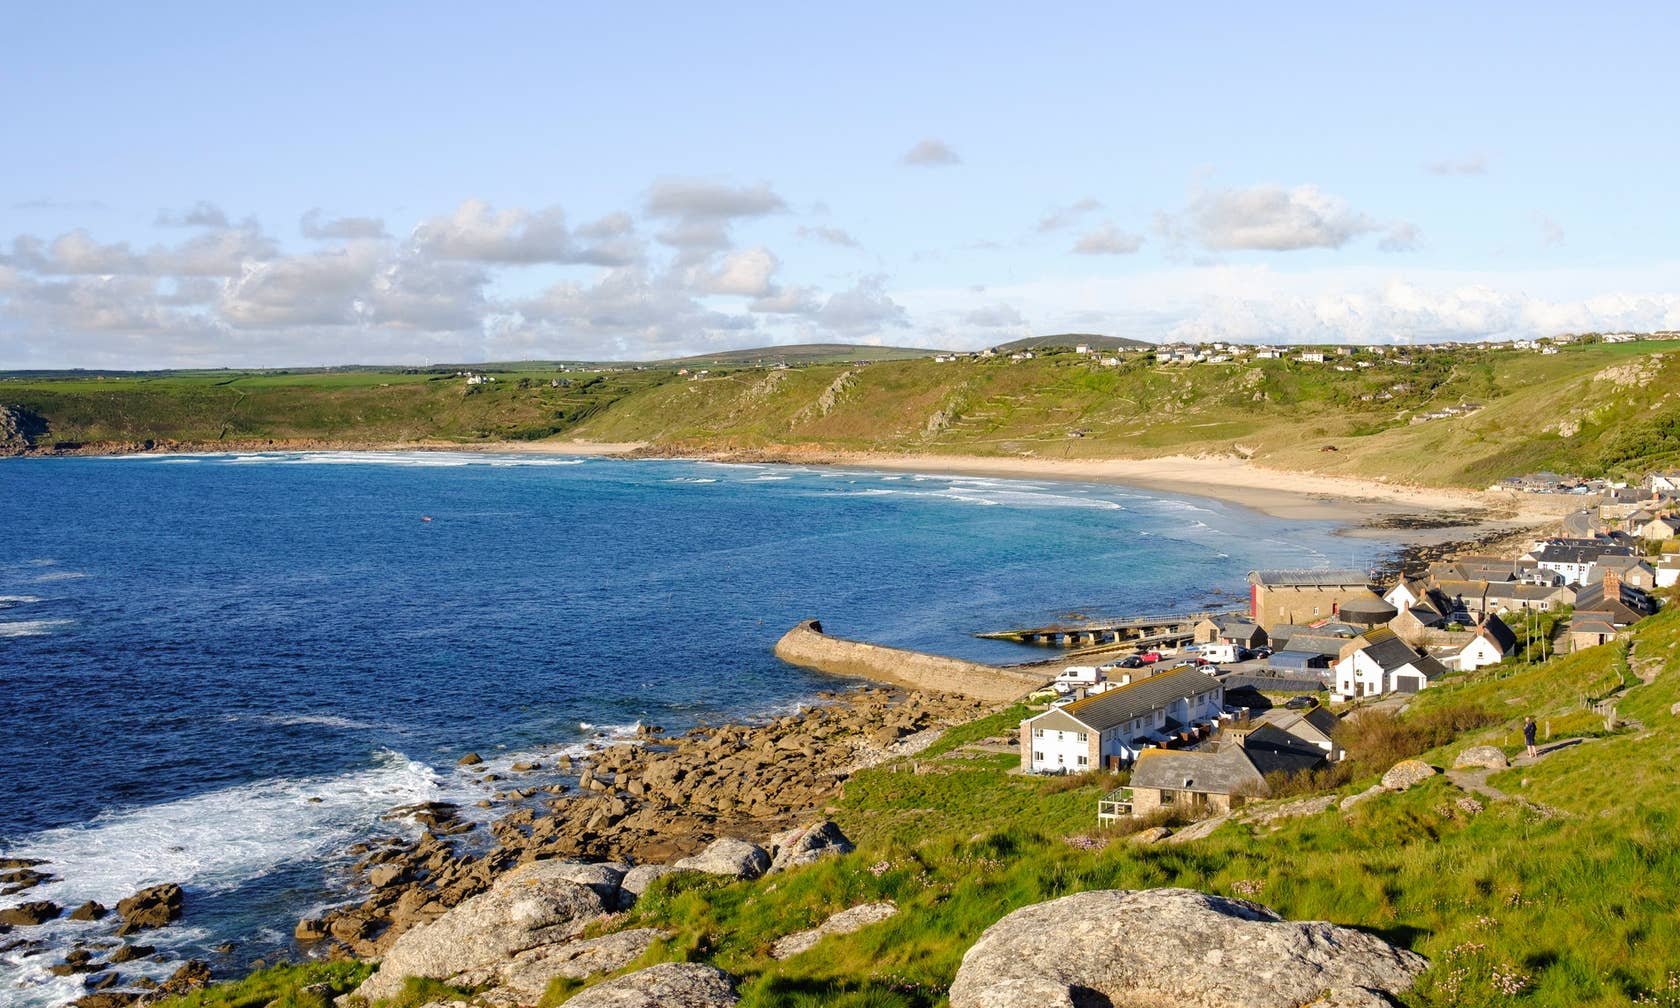 Vacation rentals in Sennen Cove